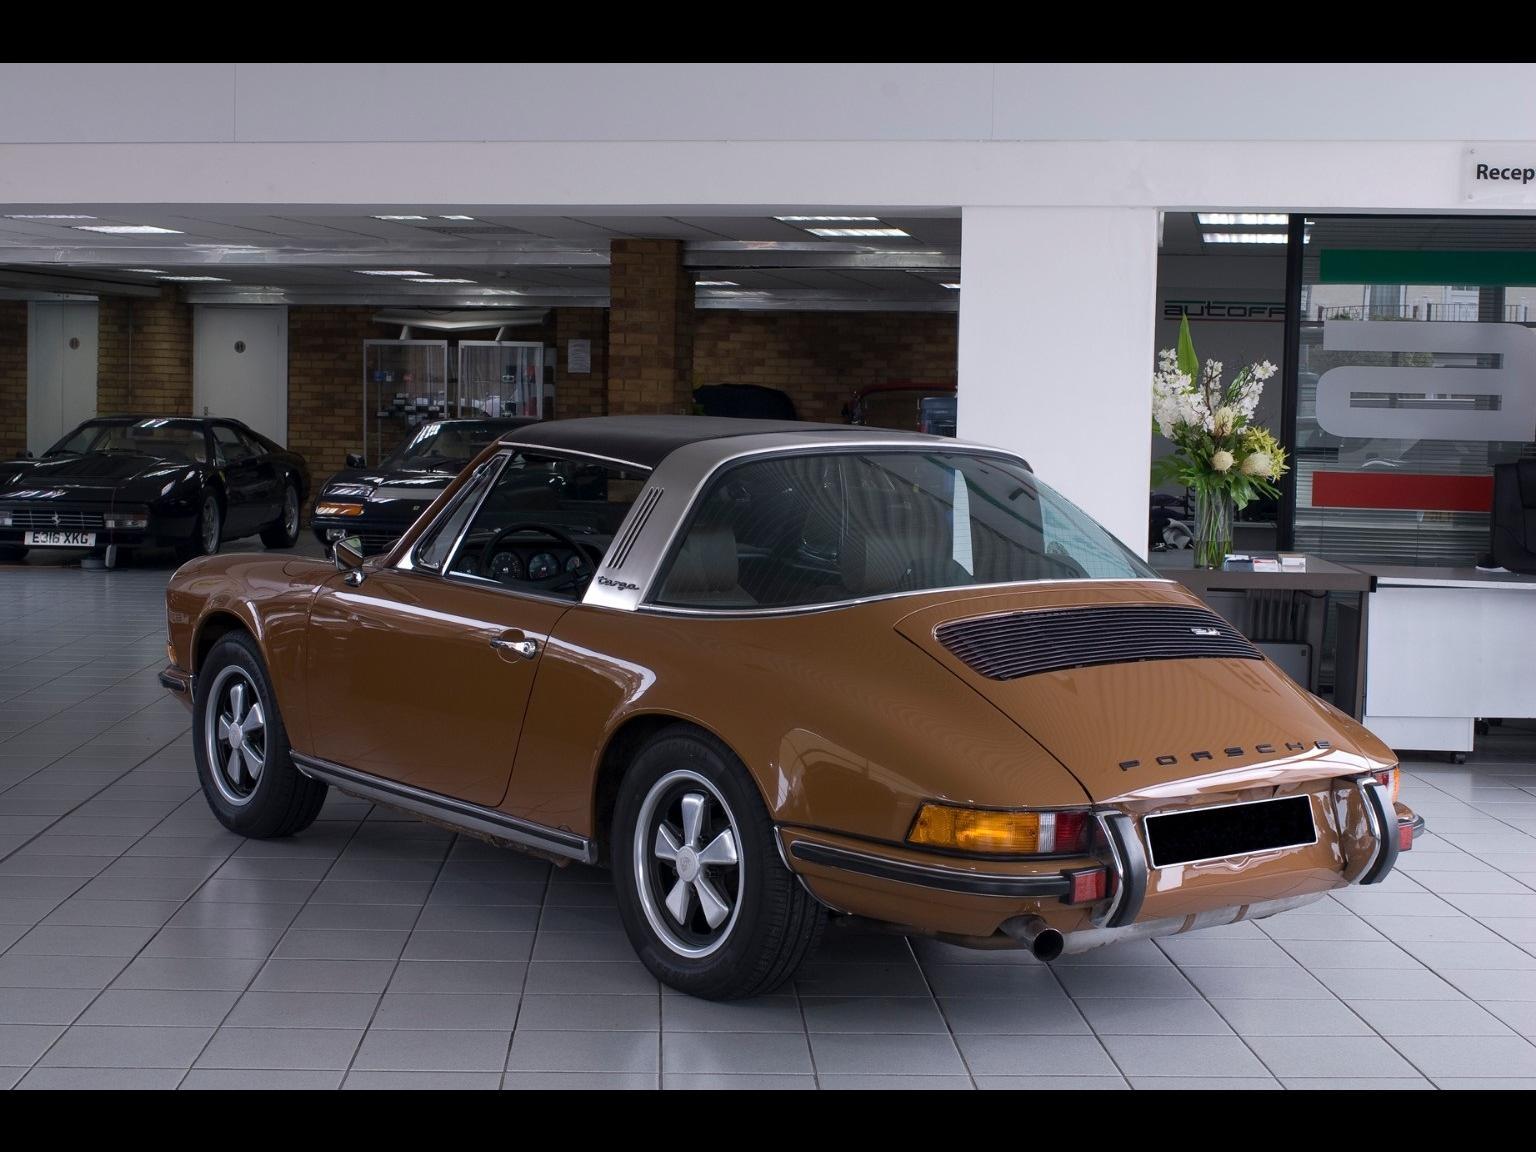 Used Porsche 911 MFI for sale in Epsom, Surrey